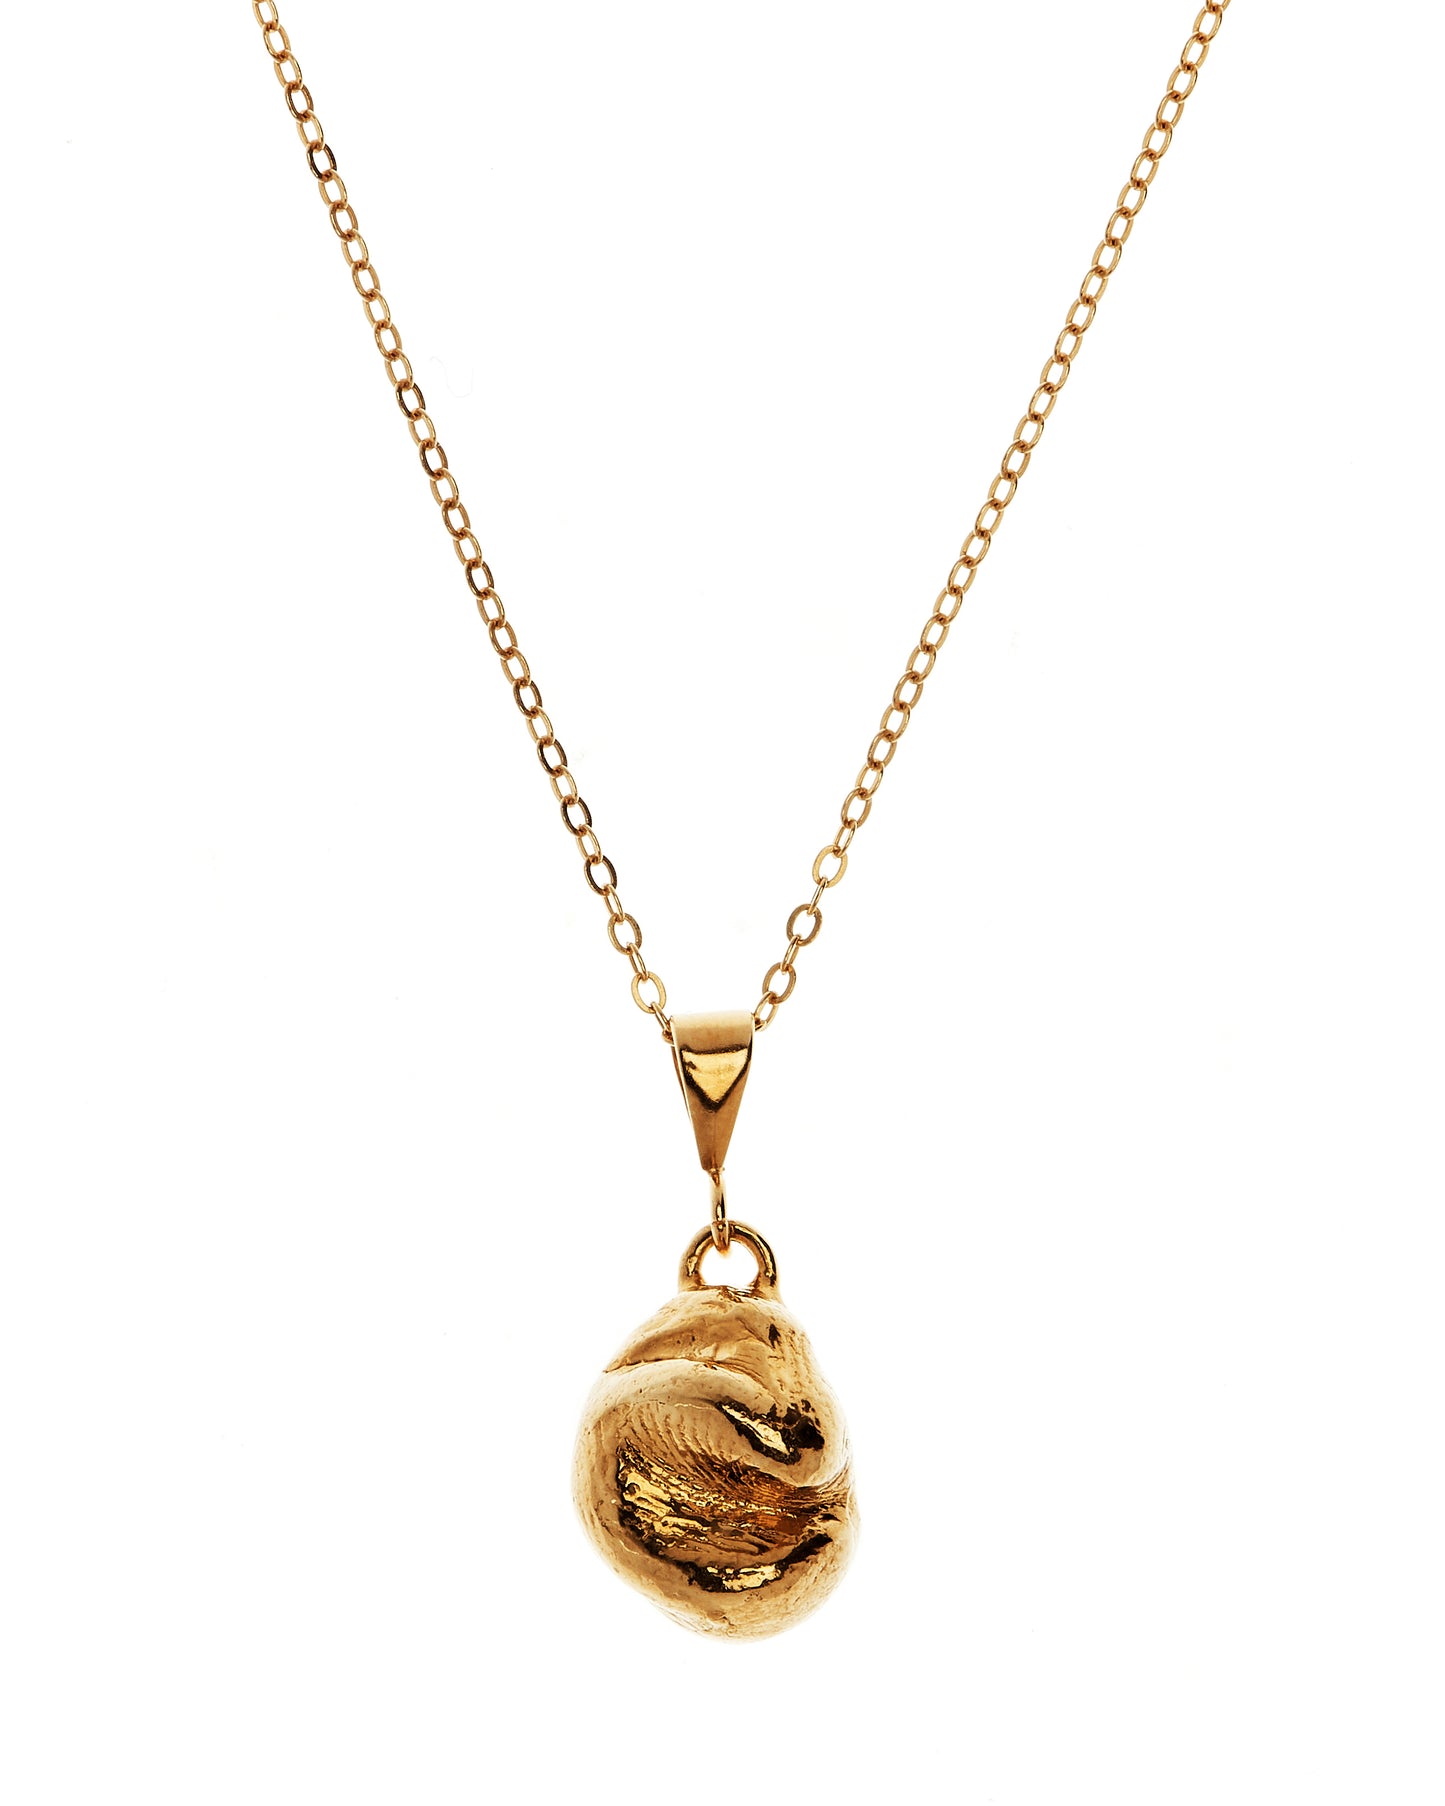 Gold vermeil trace chain with pendant